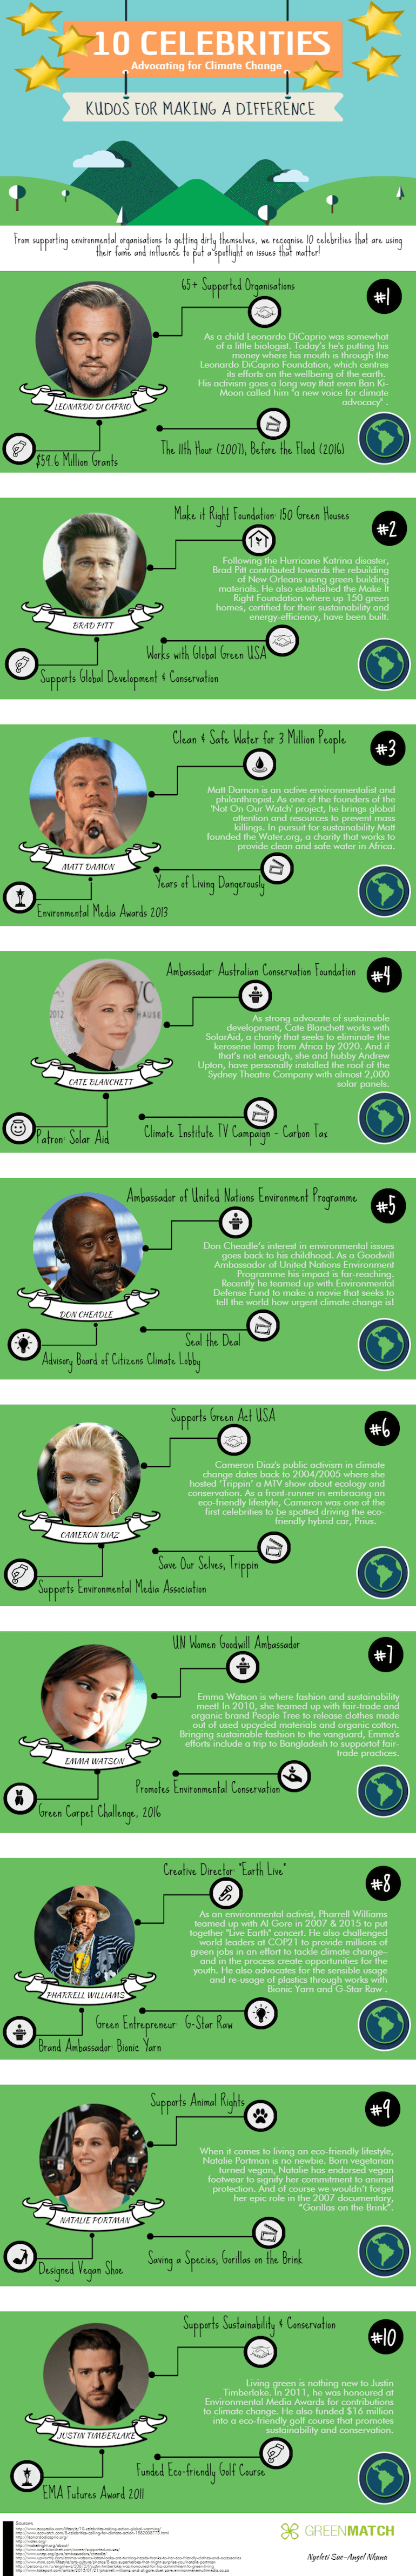 Infographic about celebrities advocating for climate change